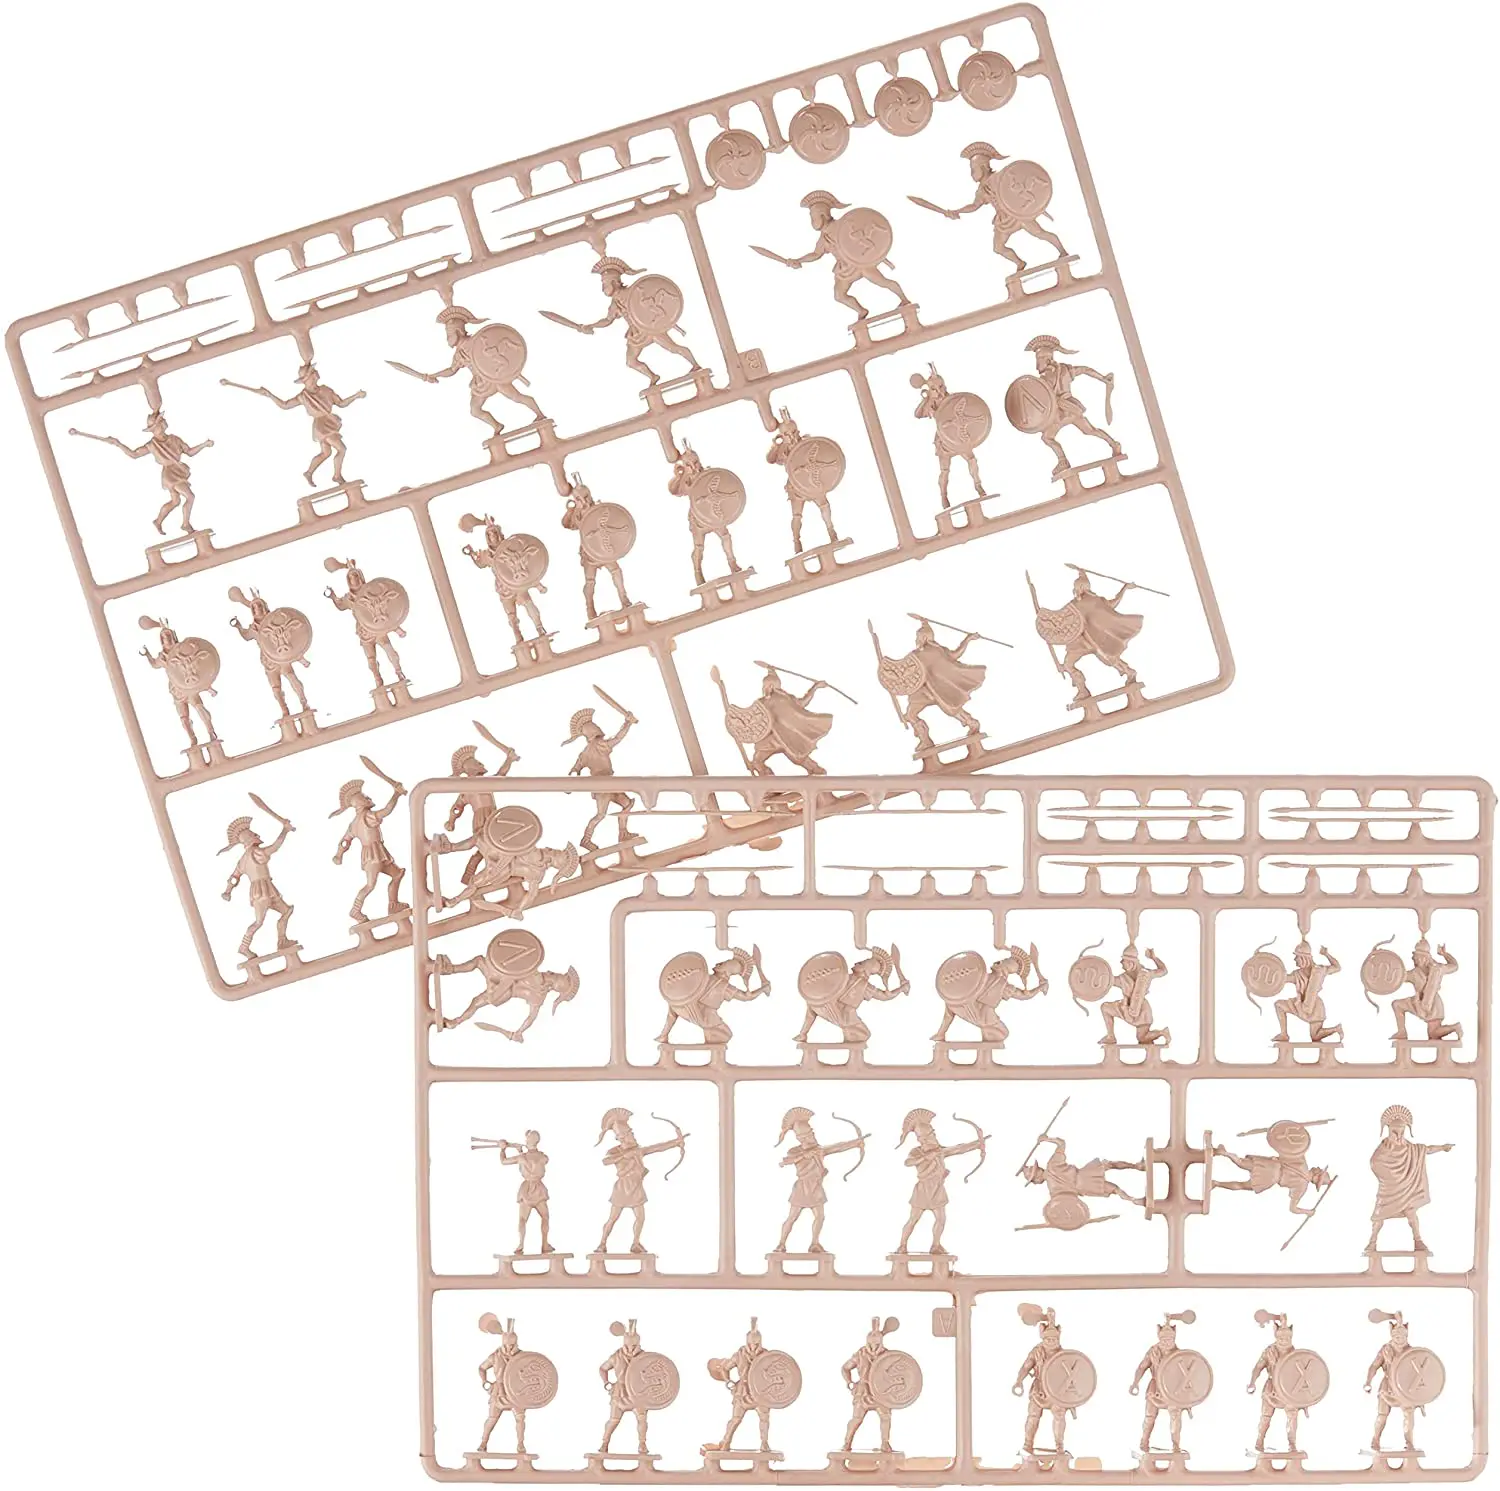 V BC II AD" soldiers 1:72 Zvezda Model Kits "Warriors of Ancient World's Army 